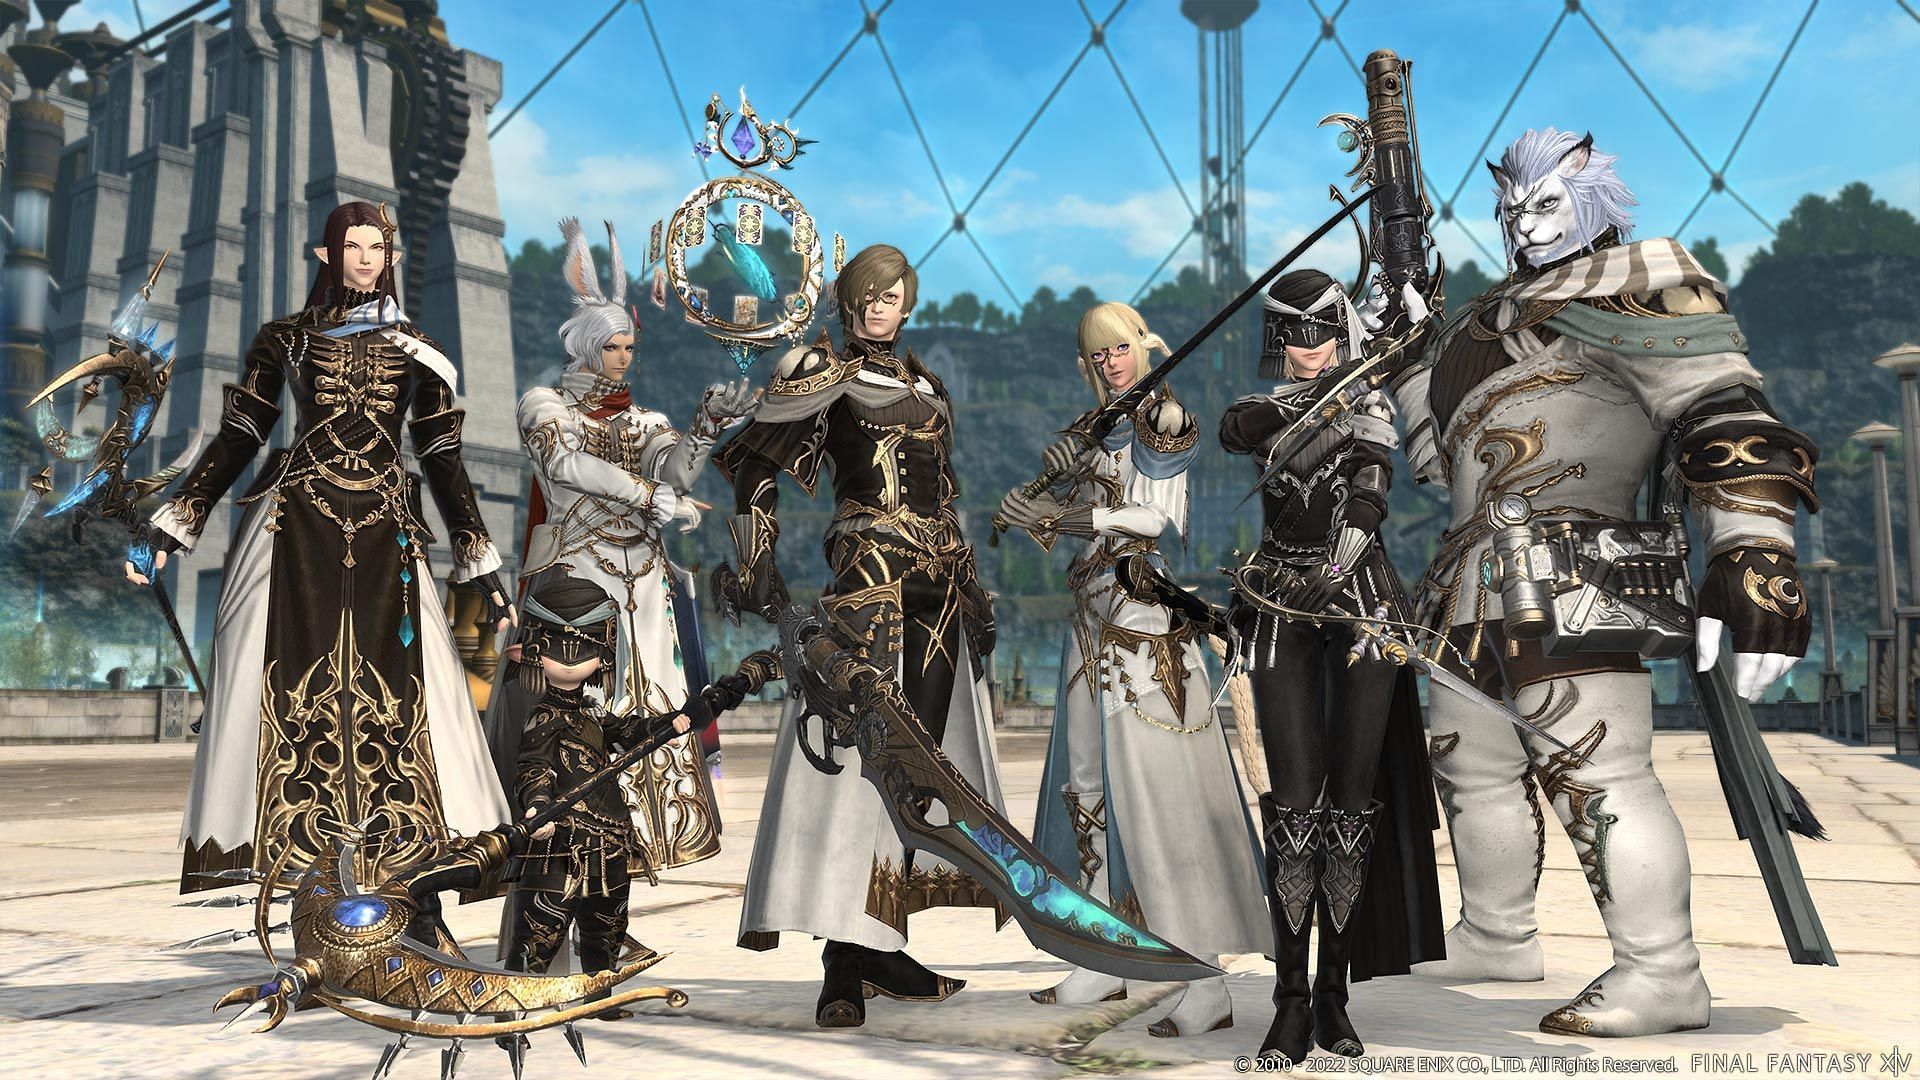 Final Fantasy 14 Xbox release date, what to expect, and more